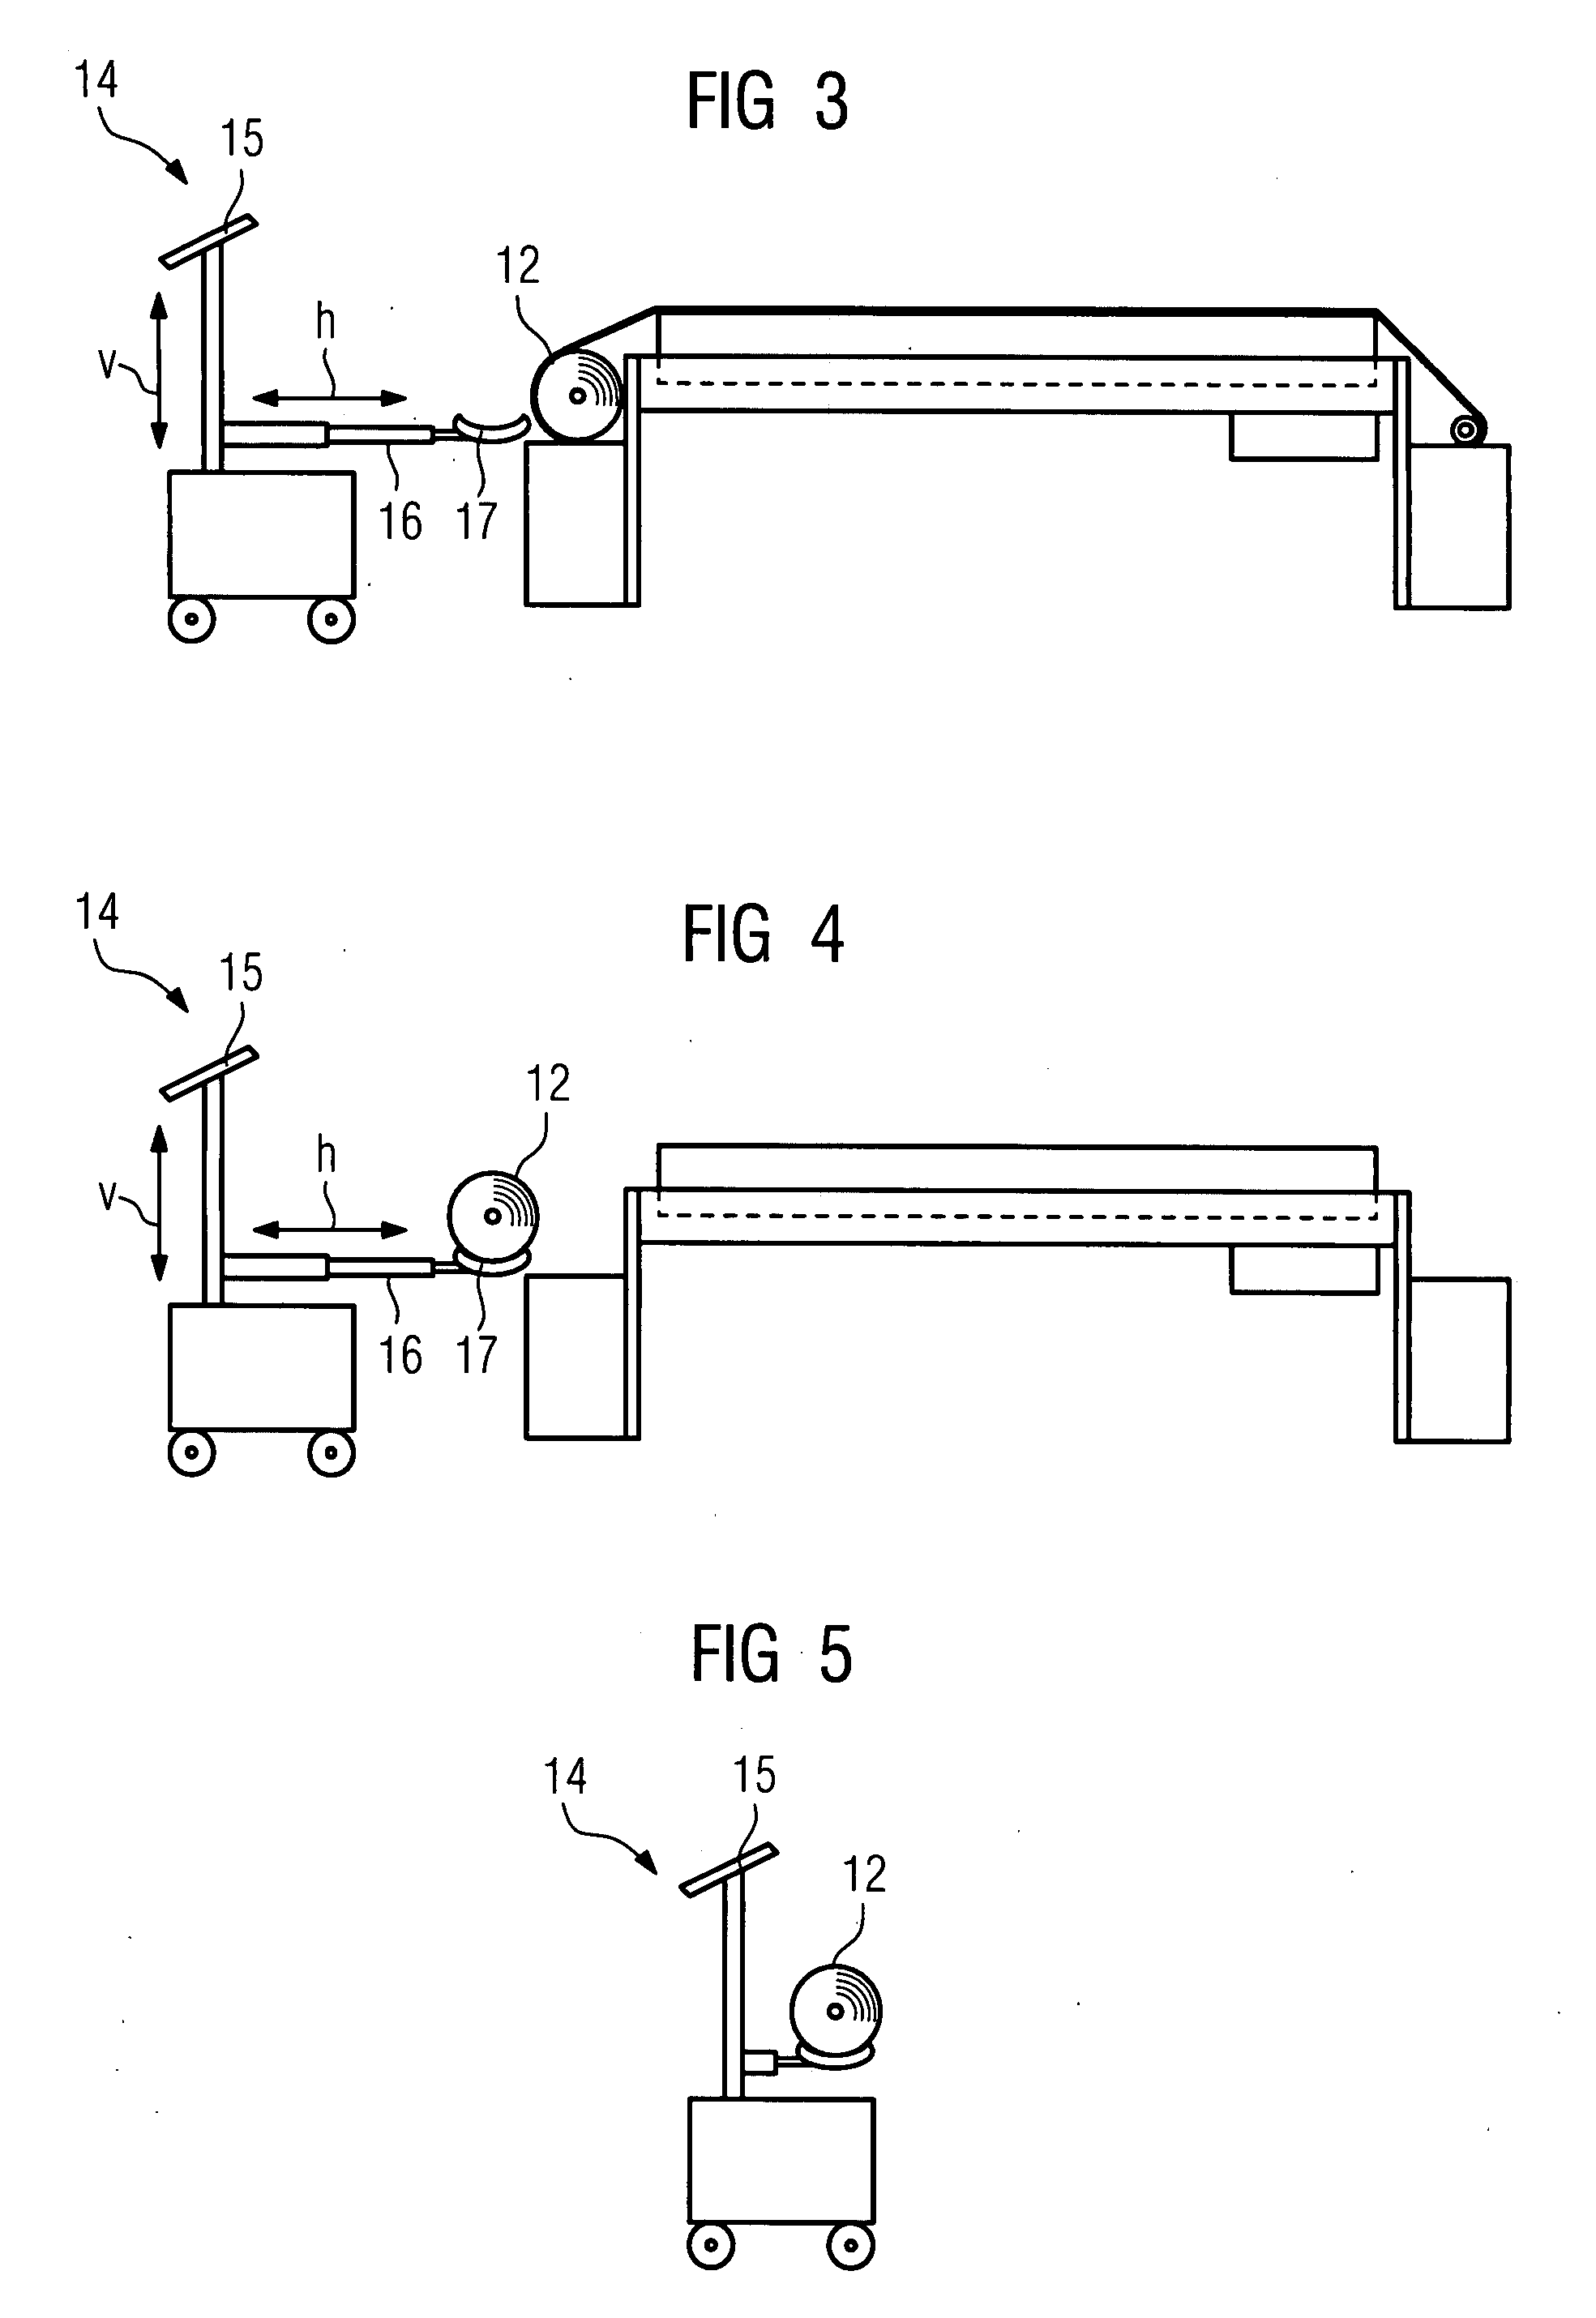 Apparatus for convering a support surface